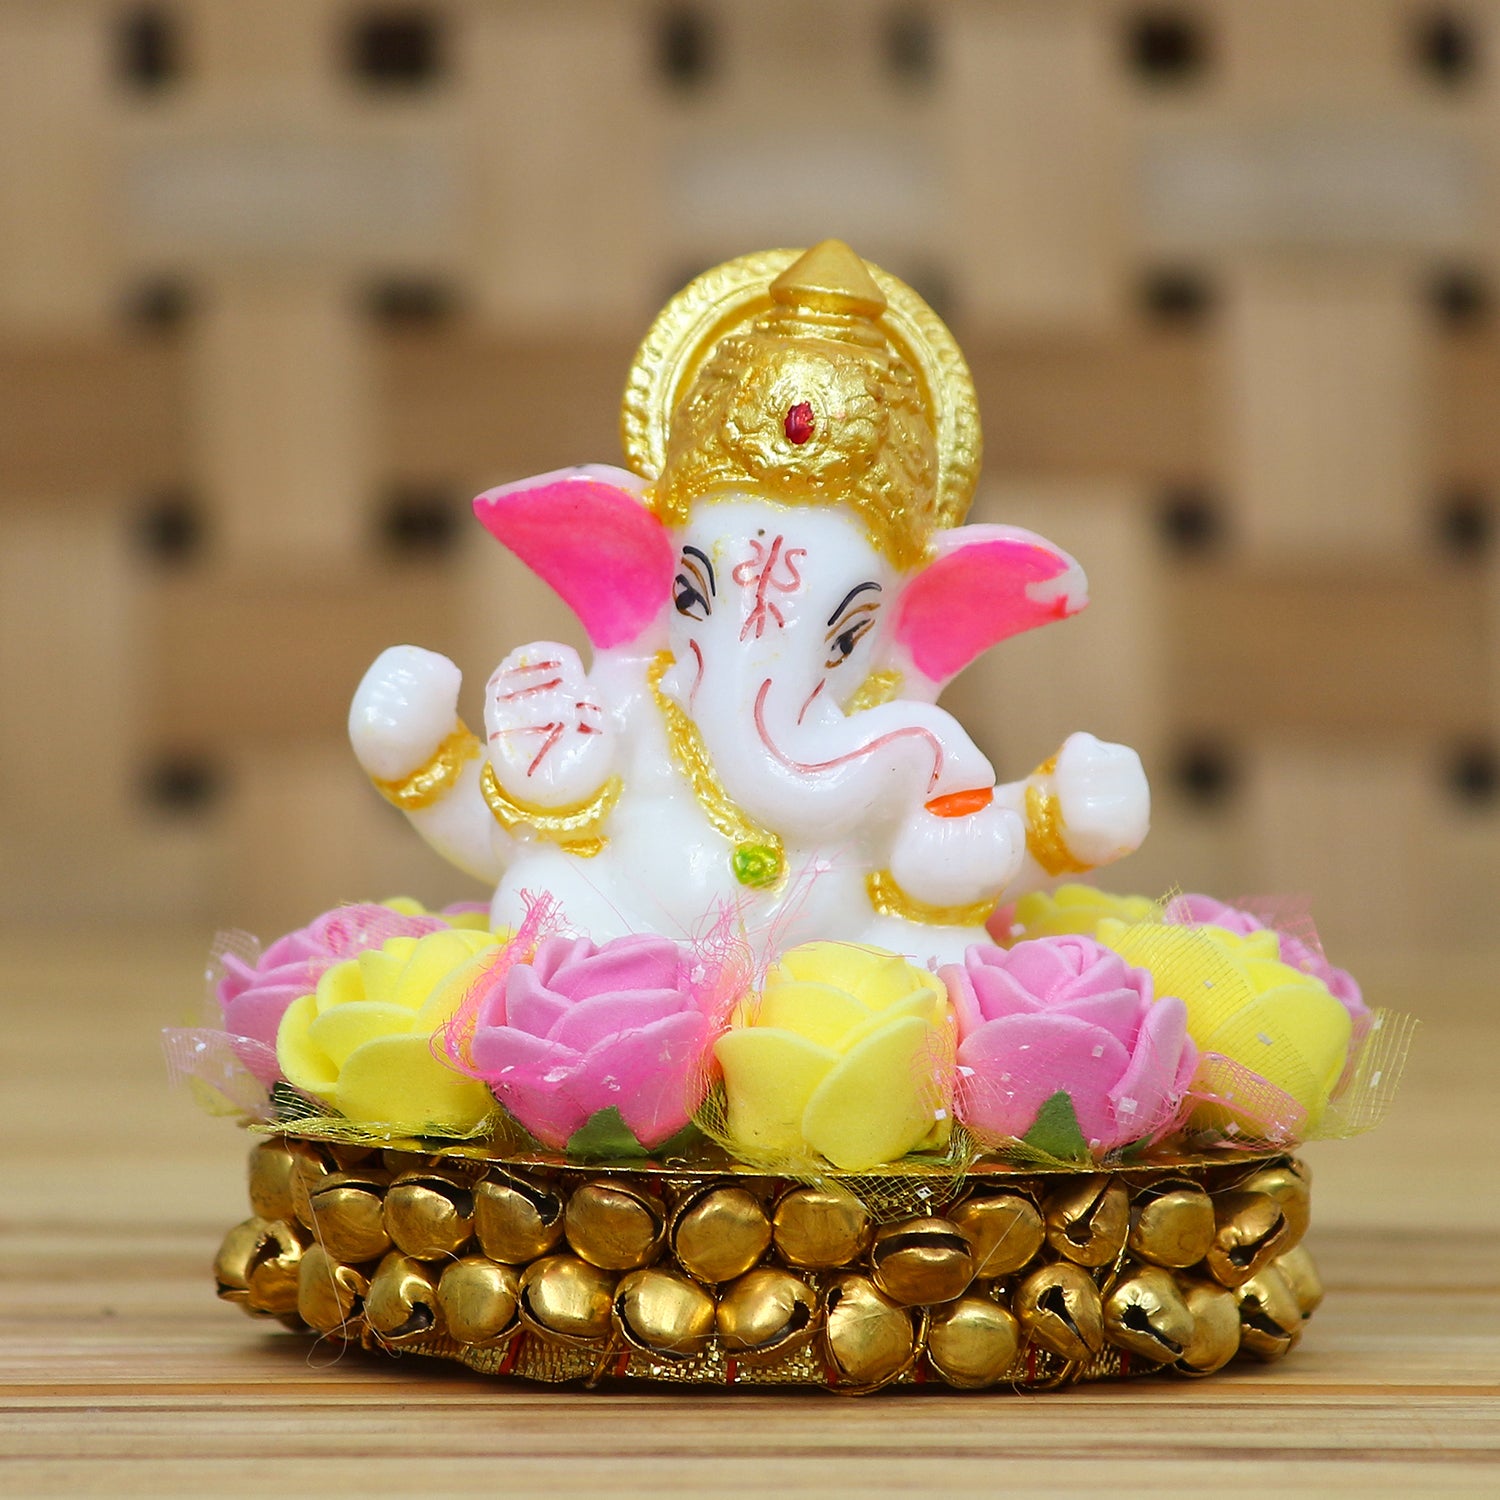 Golden and White Polyresin Lord Ganesha Idol on Decorative Handcrafted Plate with Pink and Yellow Flowers 1